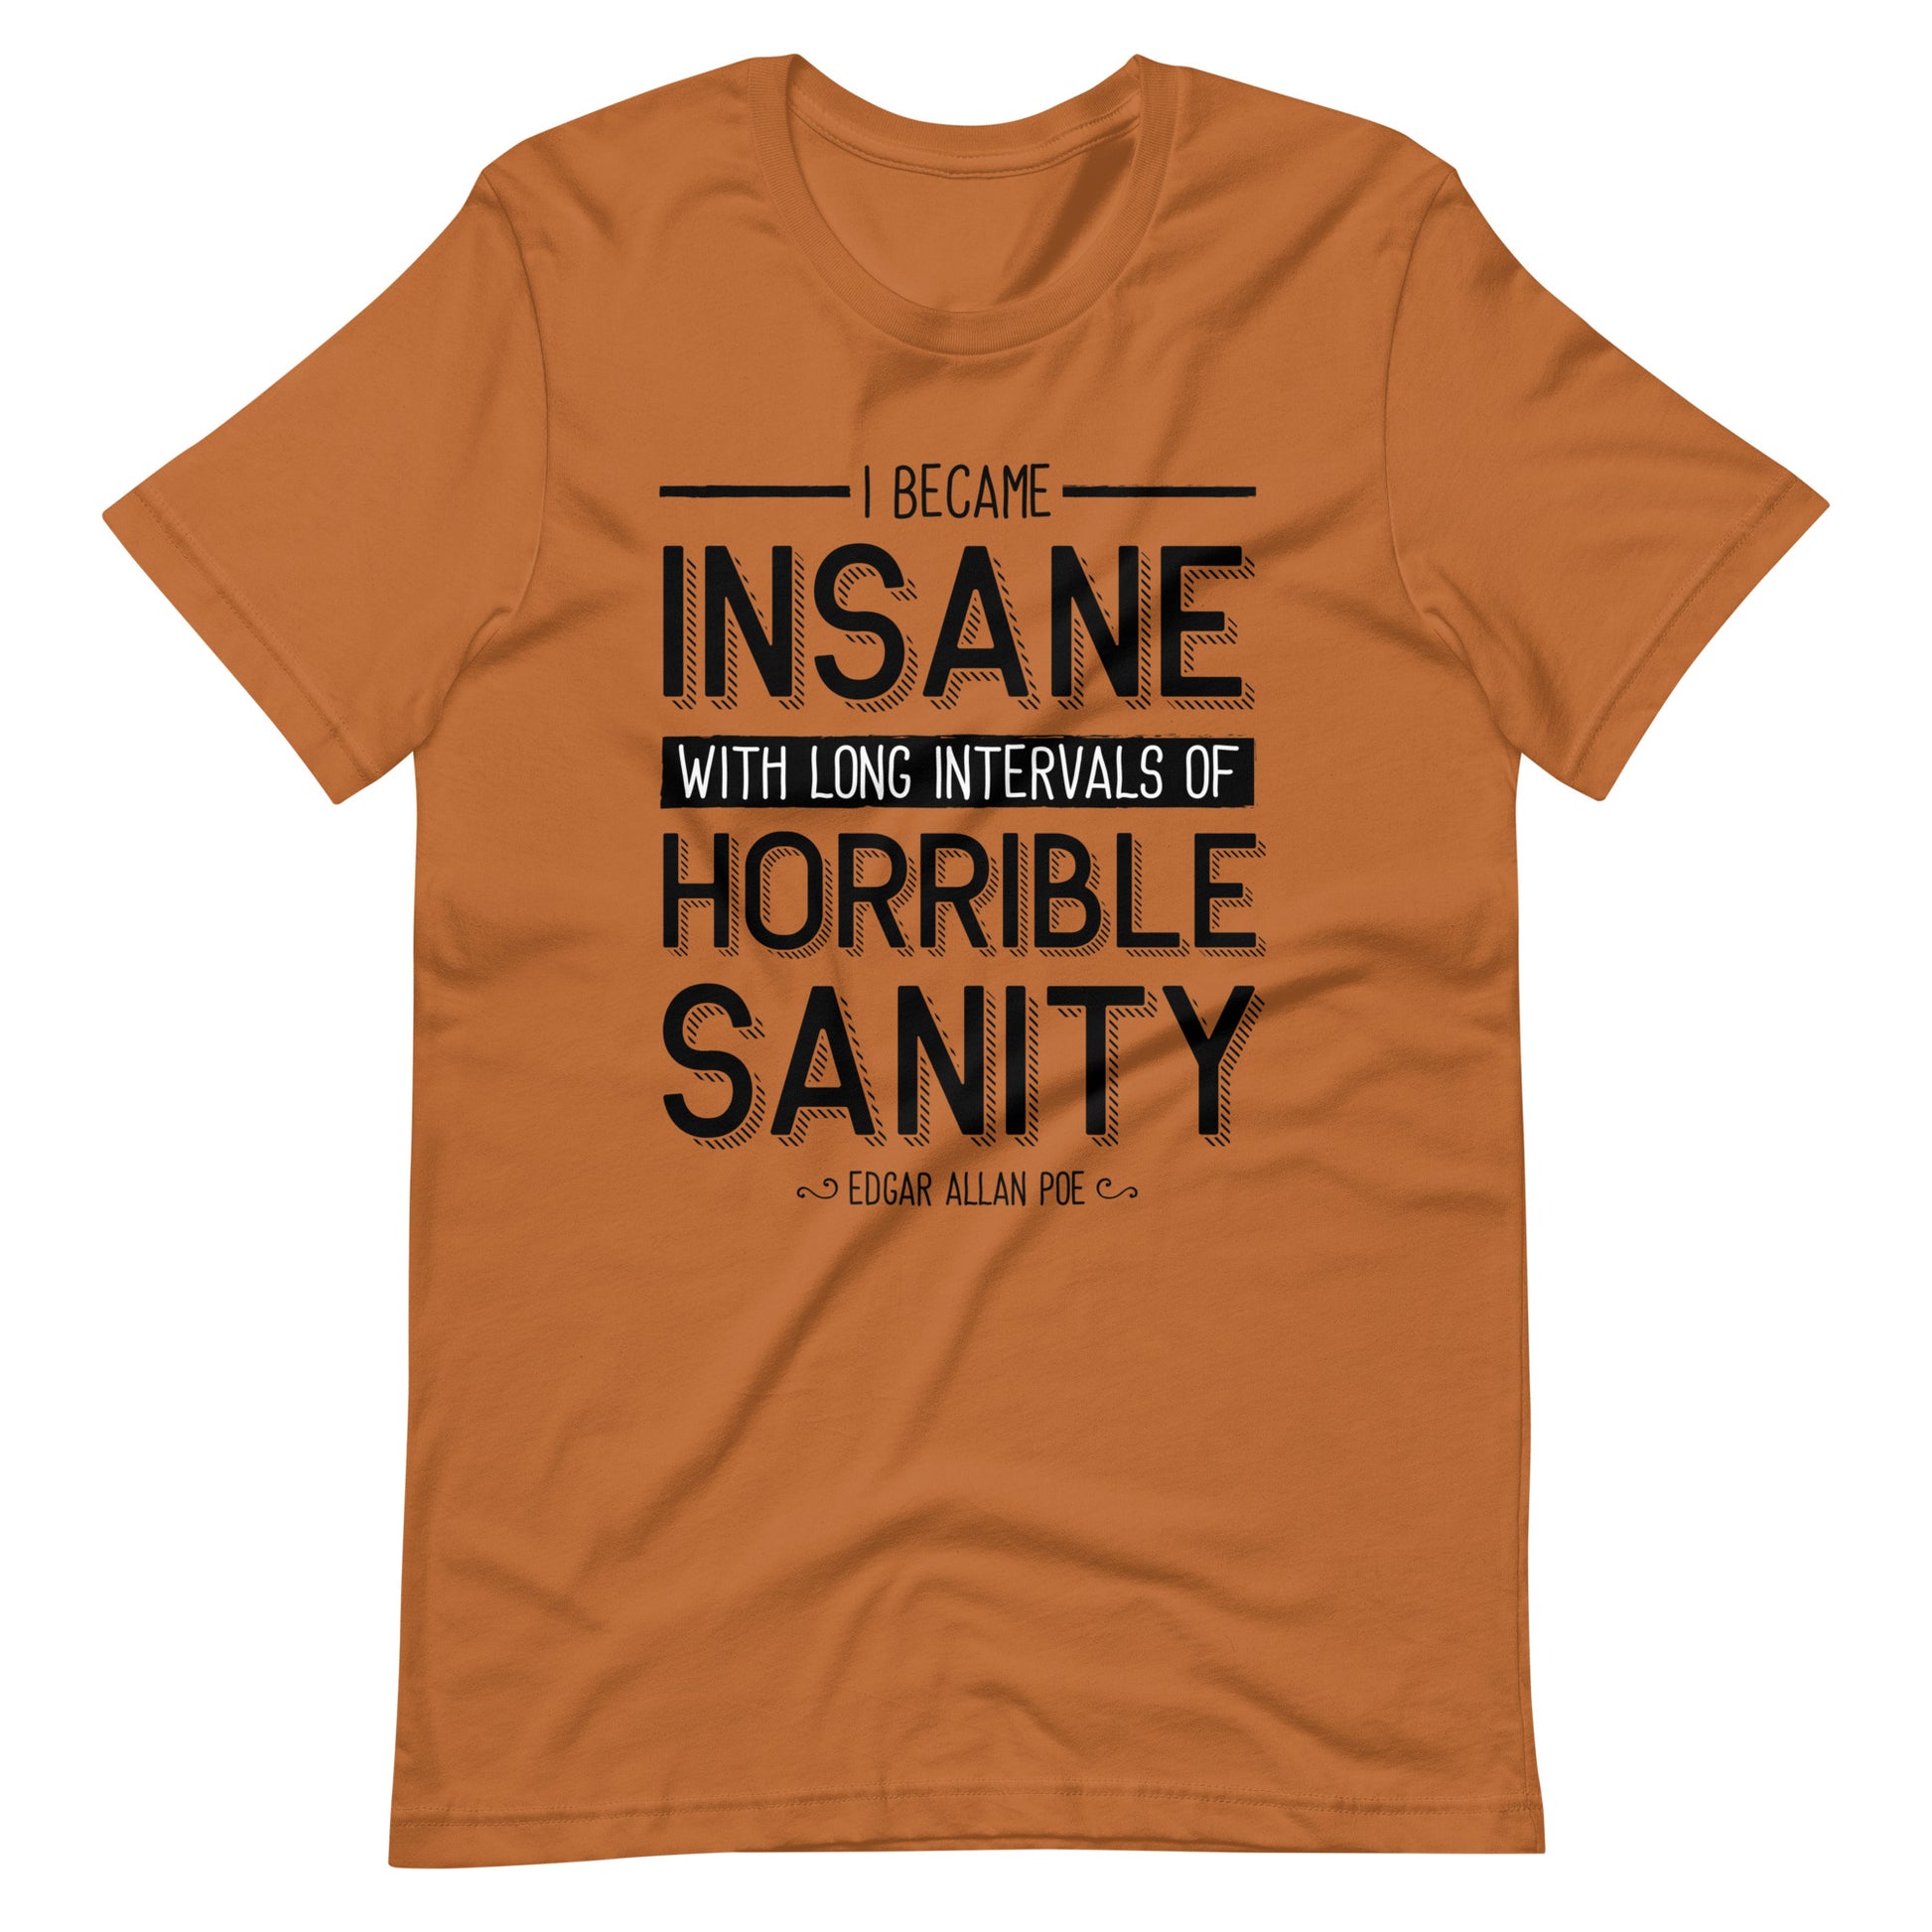 I Became Insane Edgar Allan Poe Quote - Men's t-shirt - Toast Front